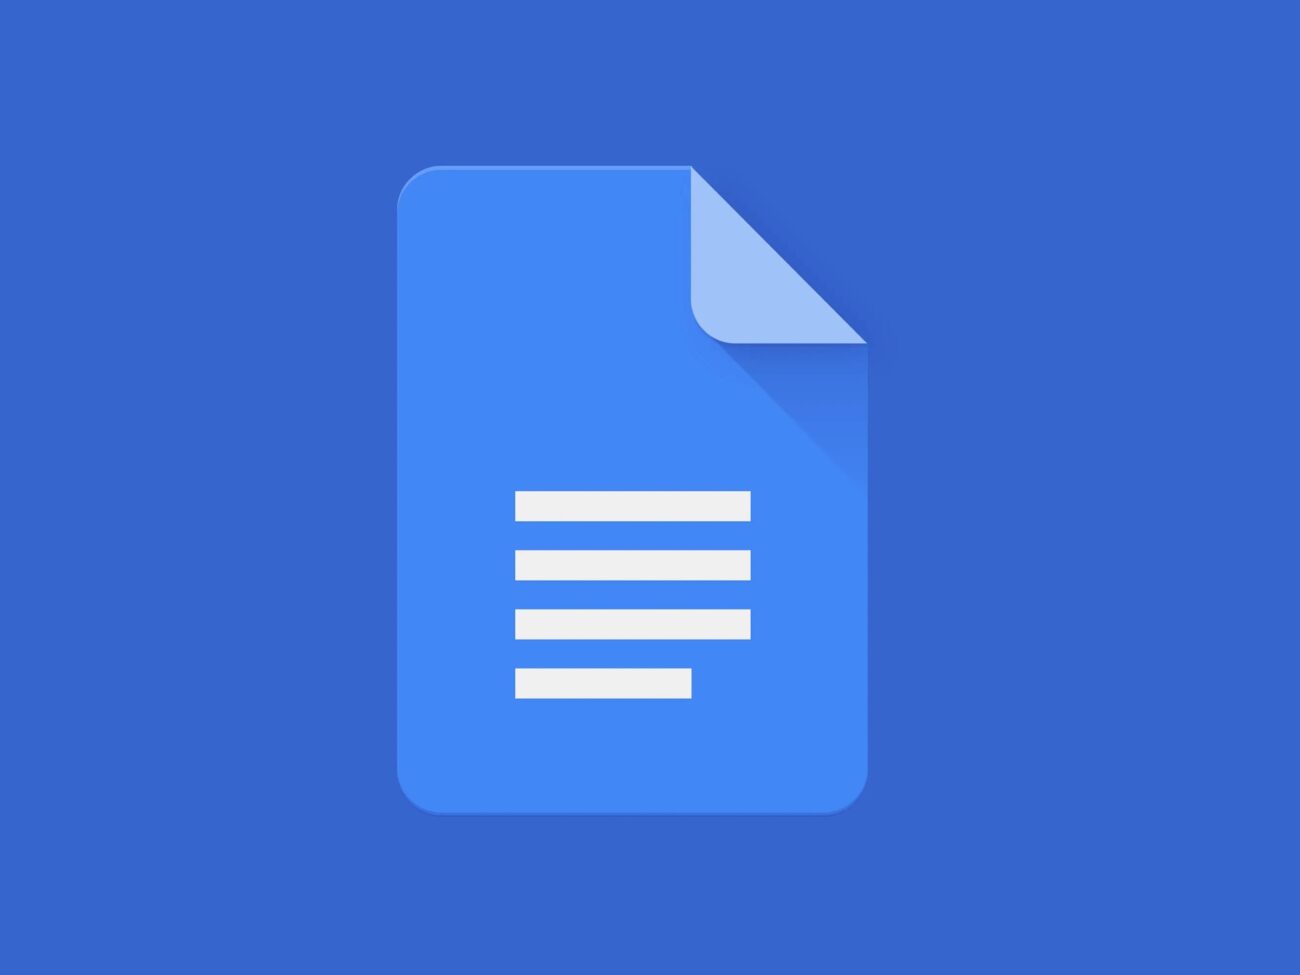 Do you use Google Docs to create content? Do you know about useful features? Read this blog to learn about practical functions you should try.